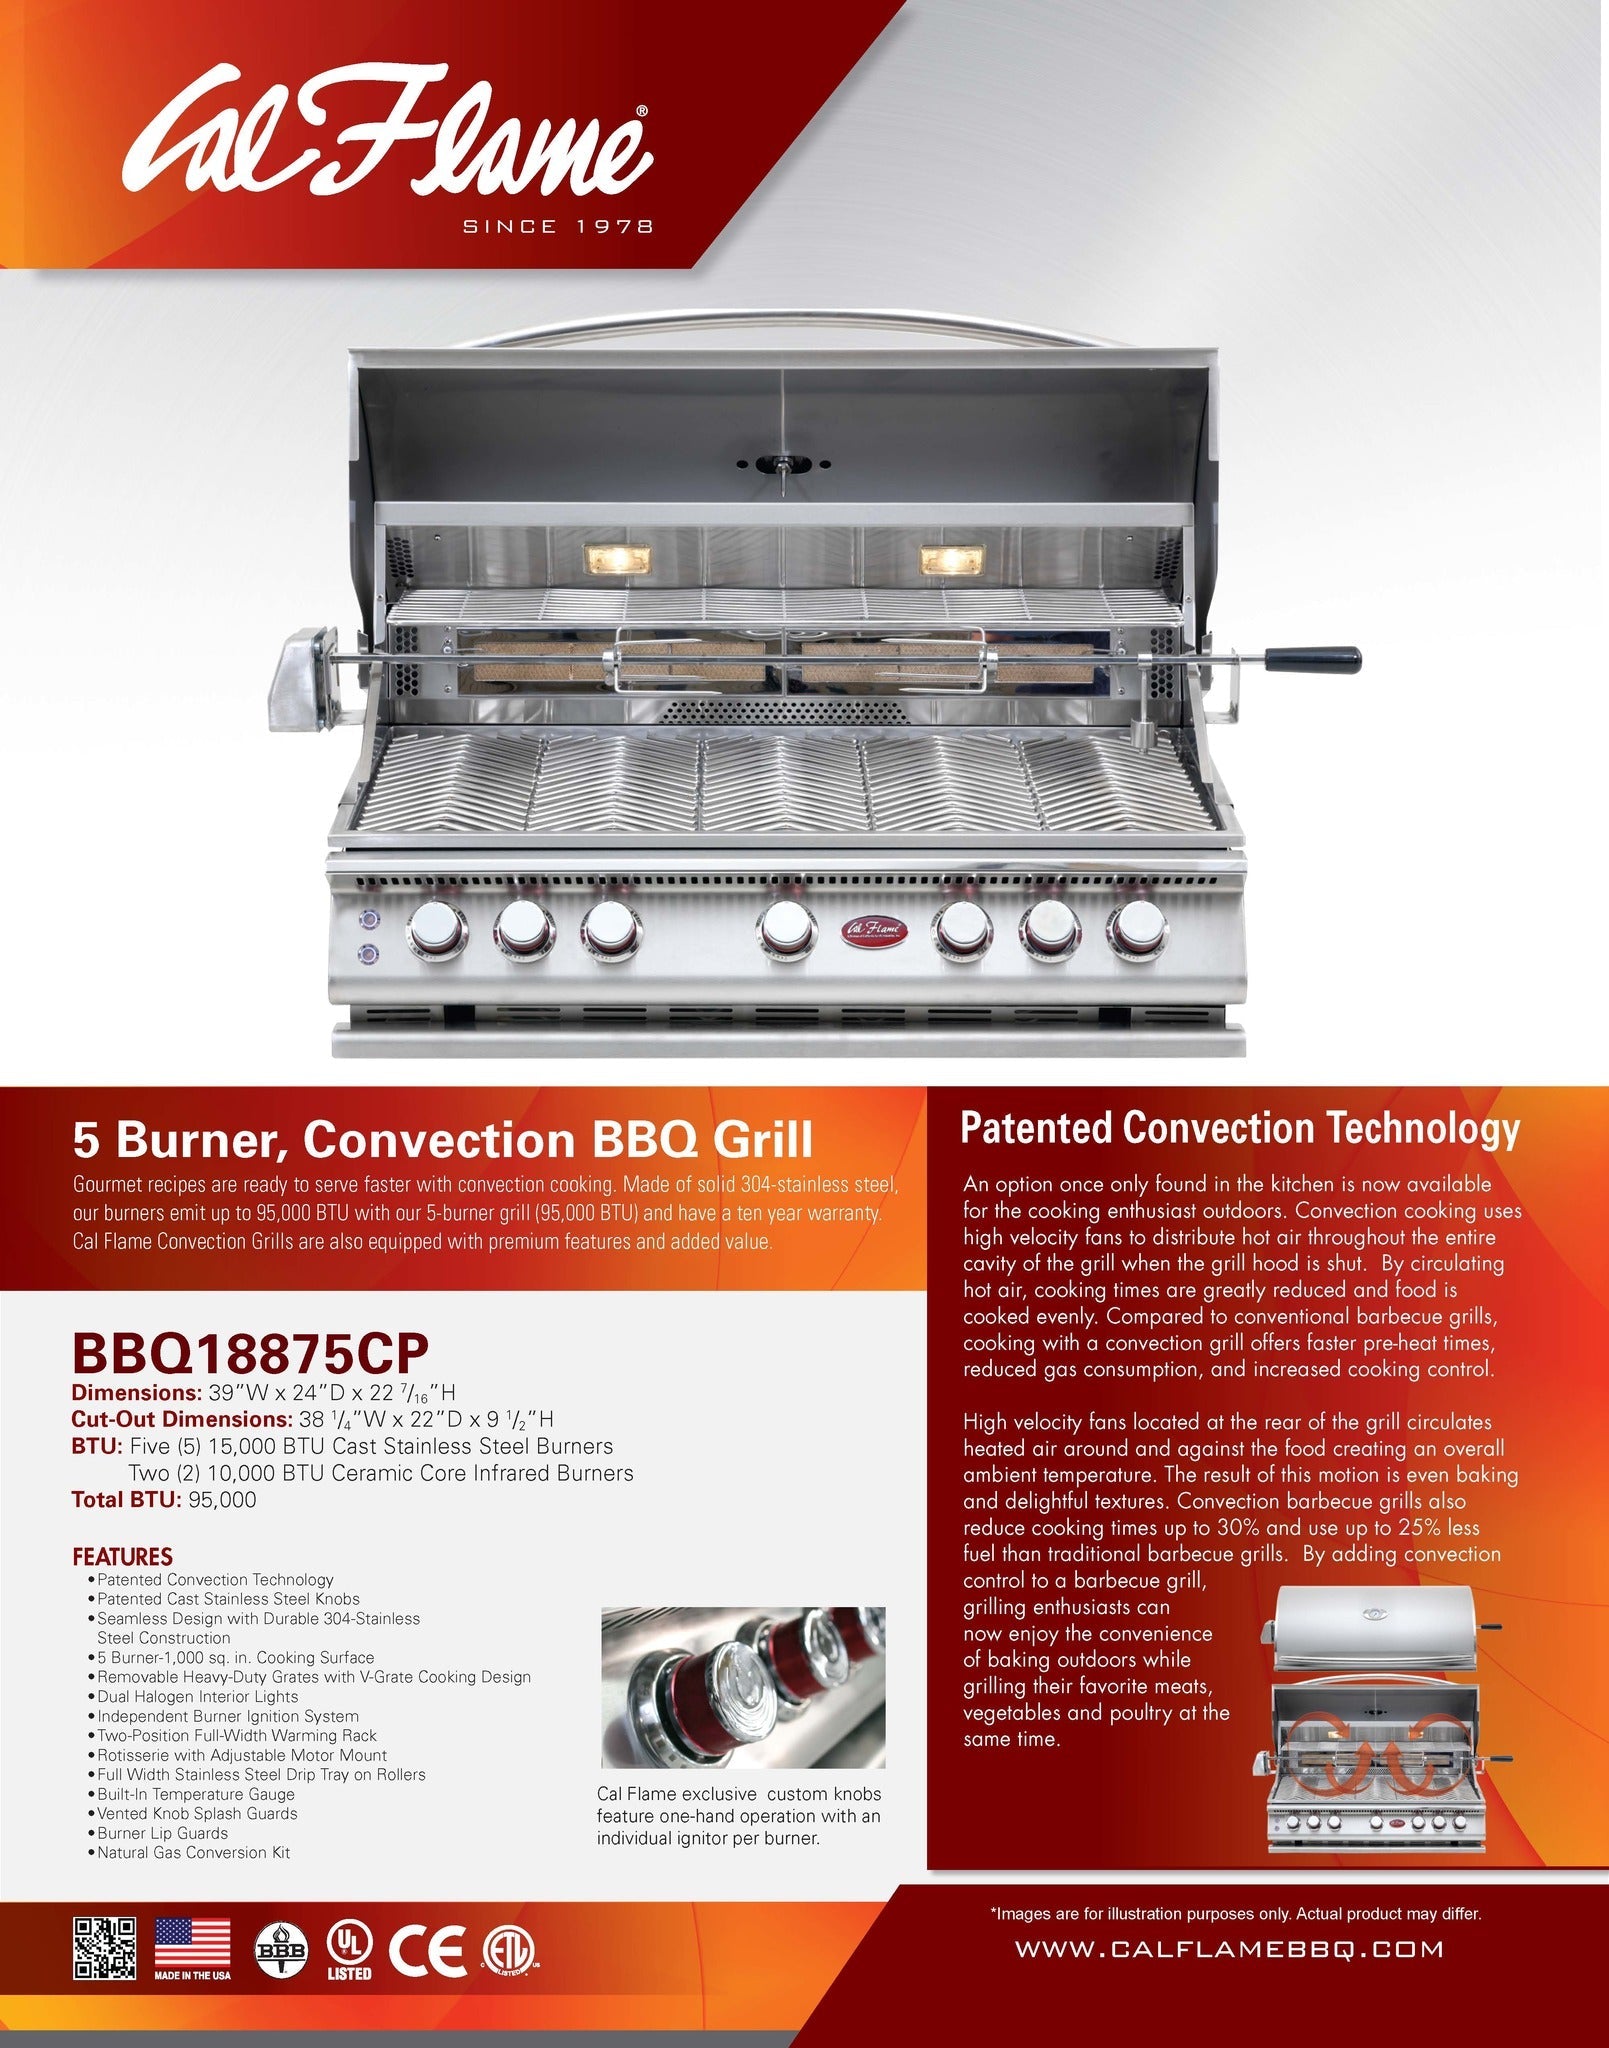 Cal Flame Convection 5 Burner Grill